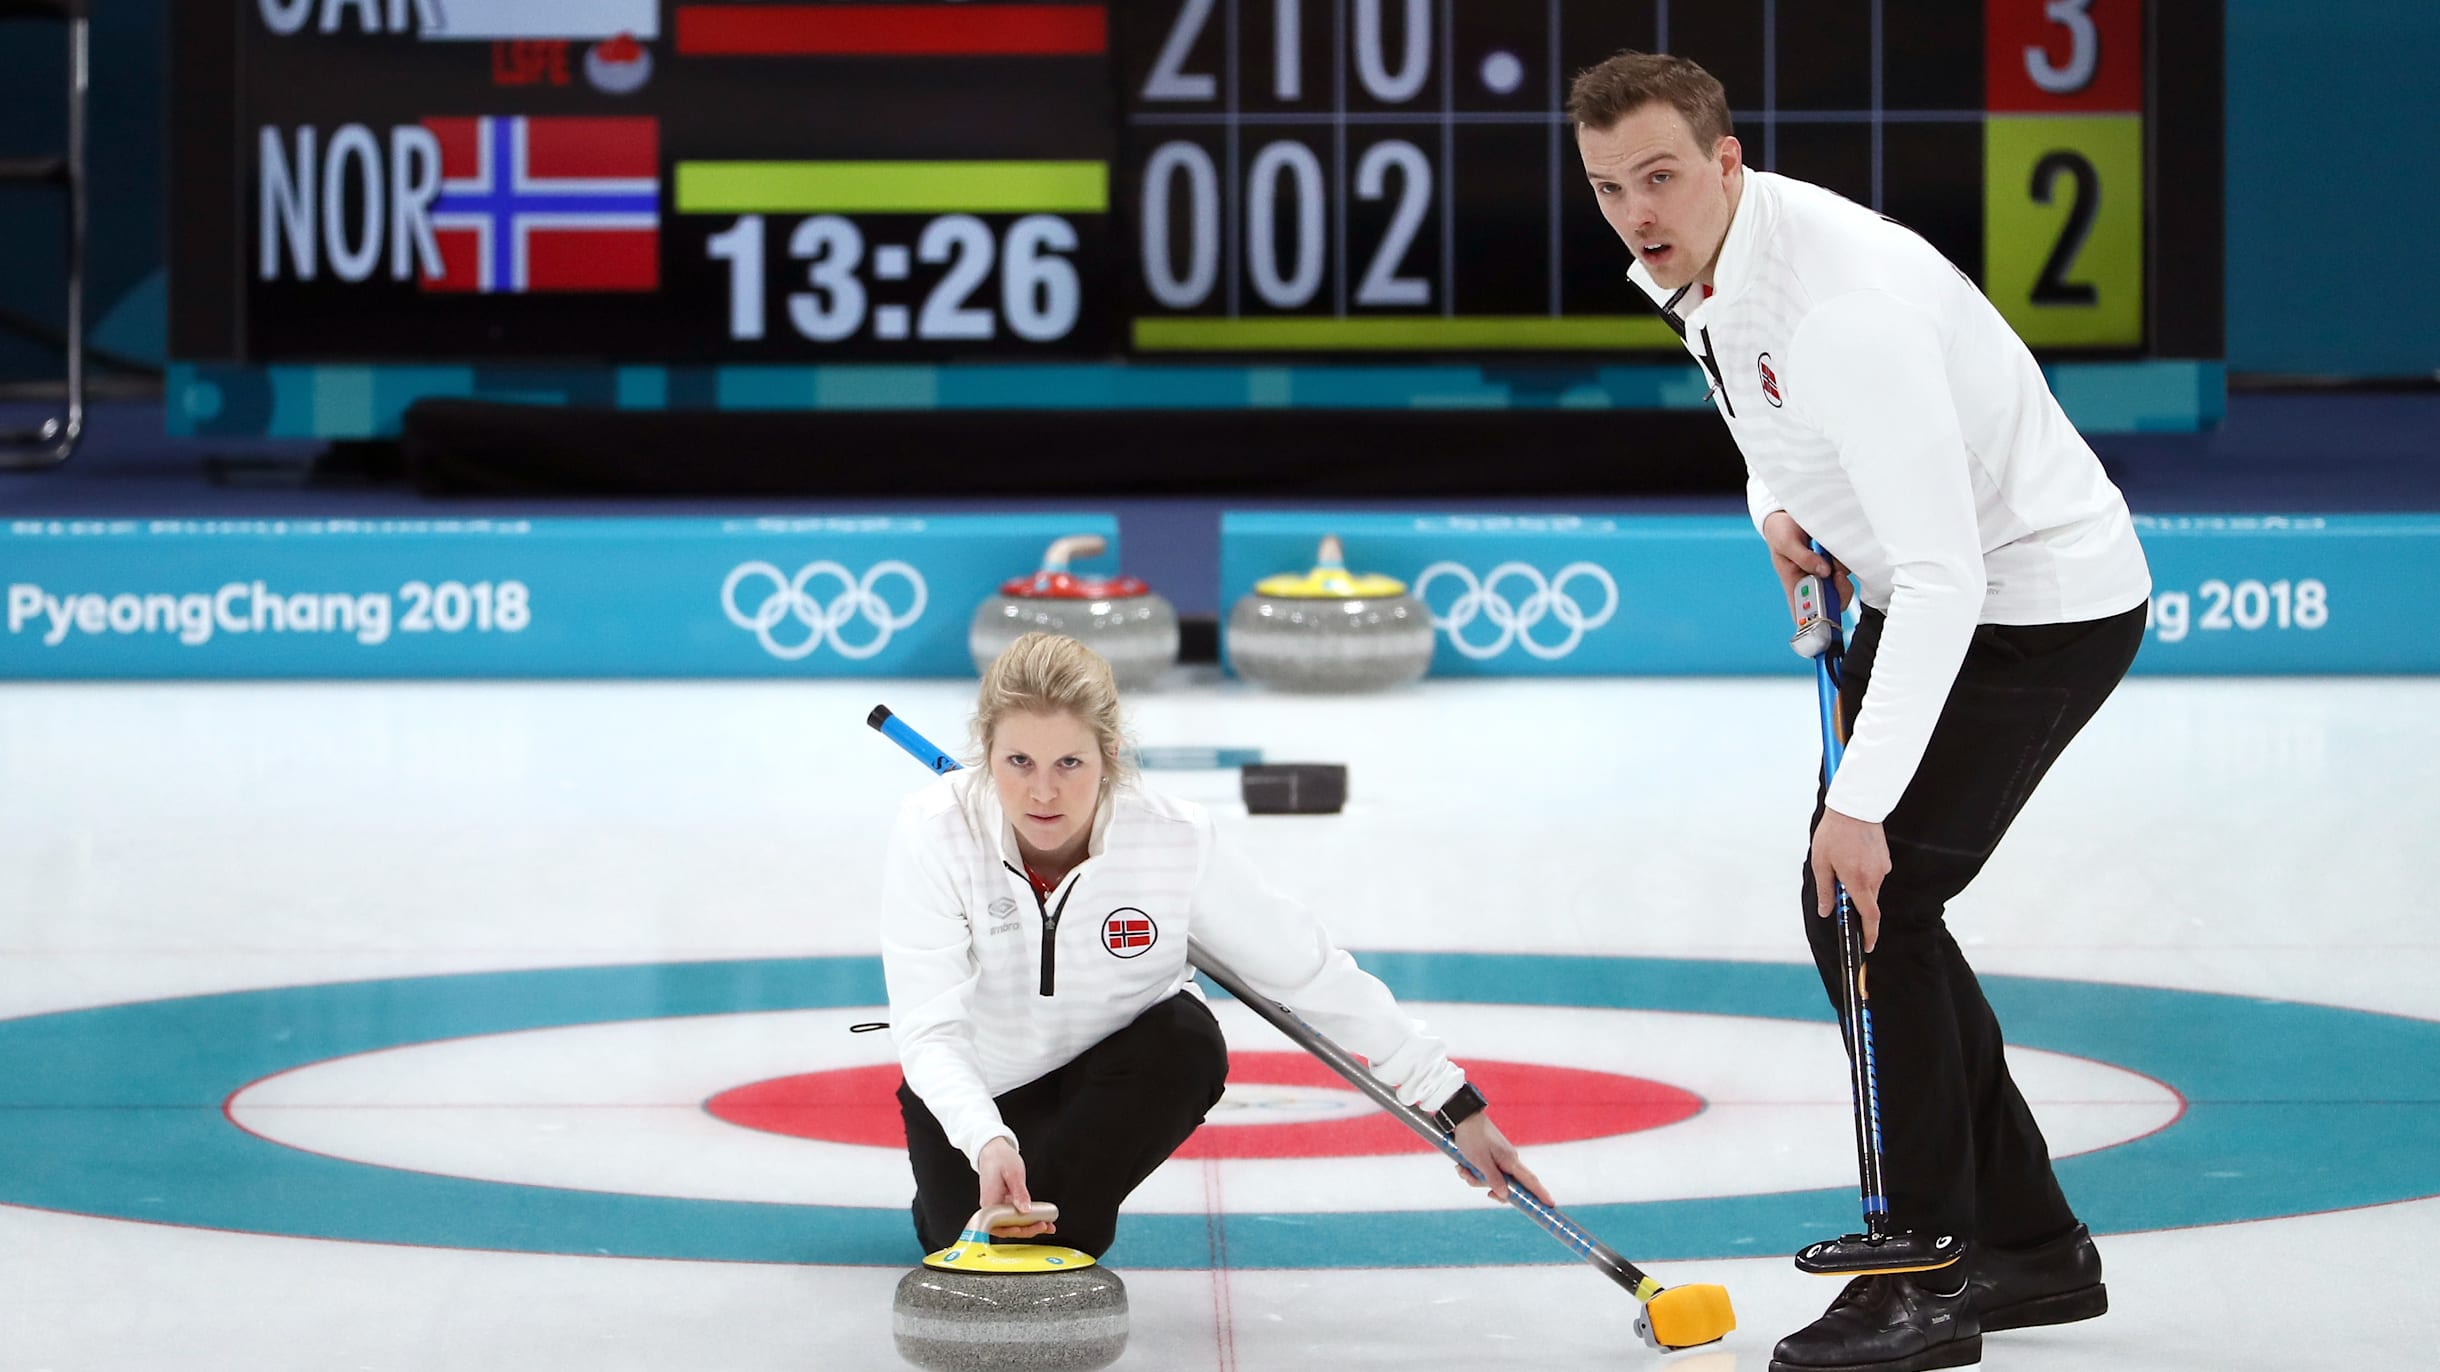 Curling mixed doubles at Beijing 2022 Everything you need to know